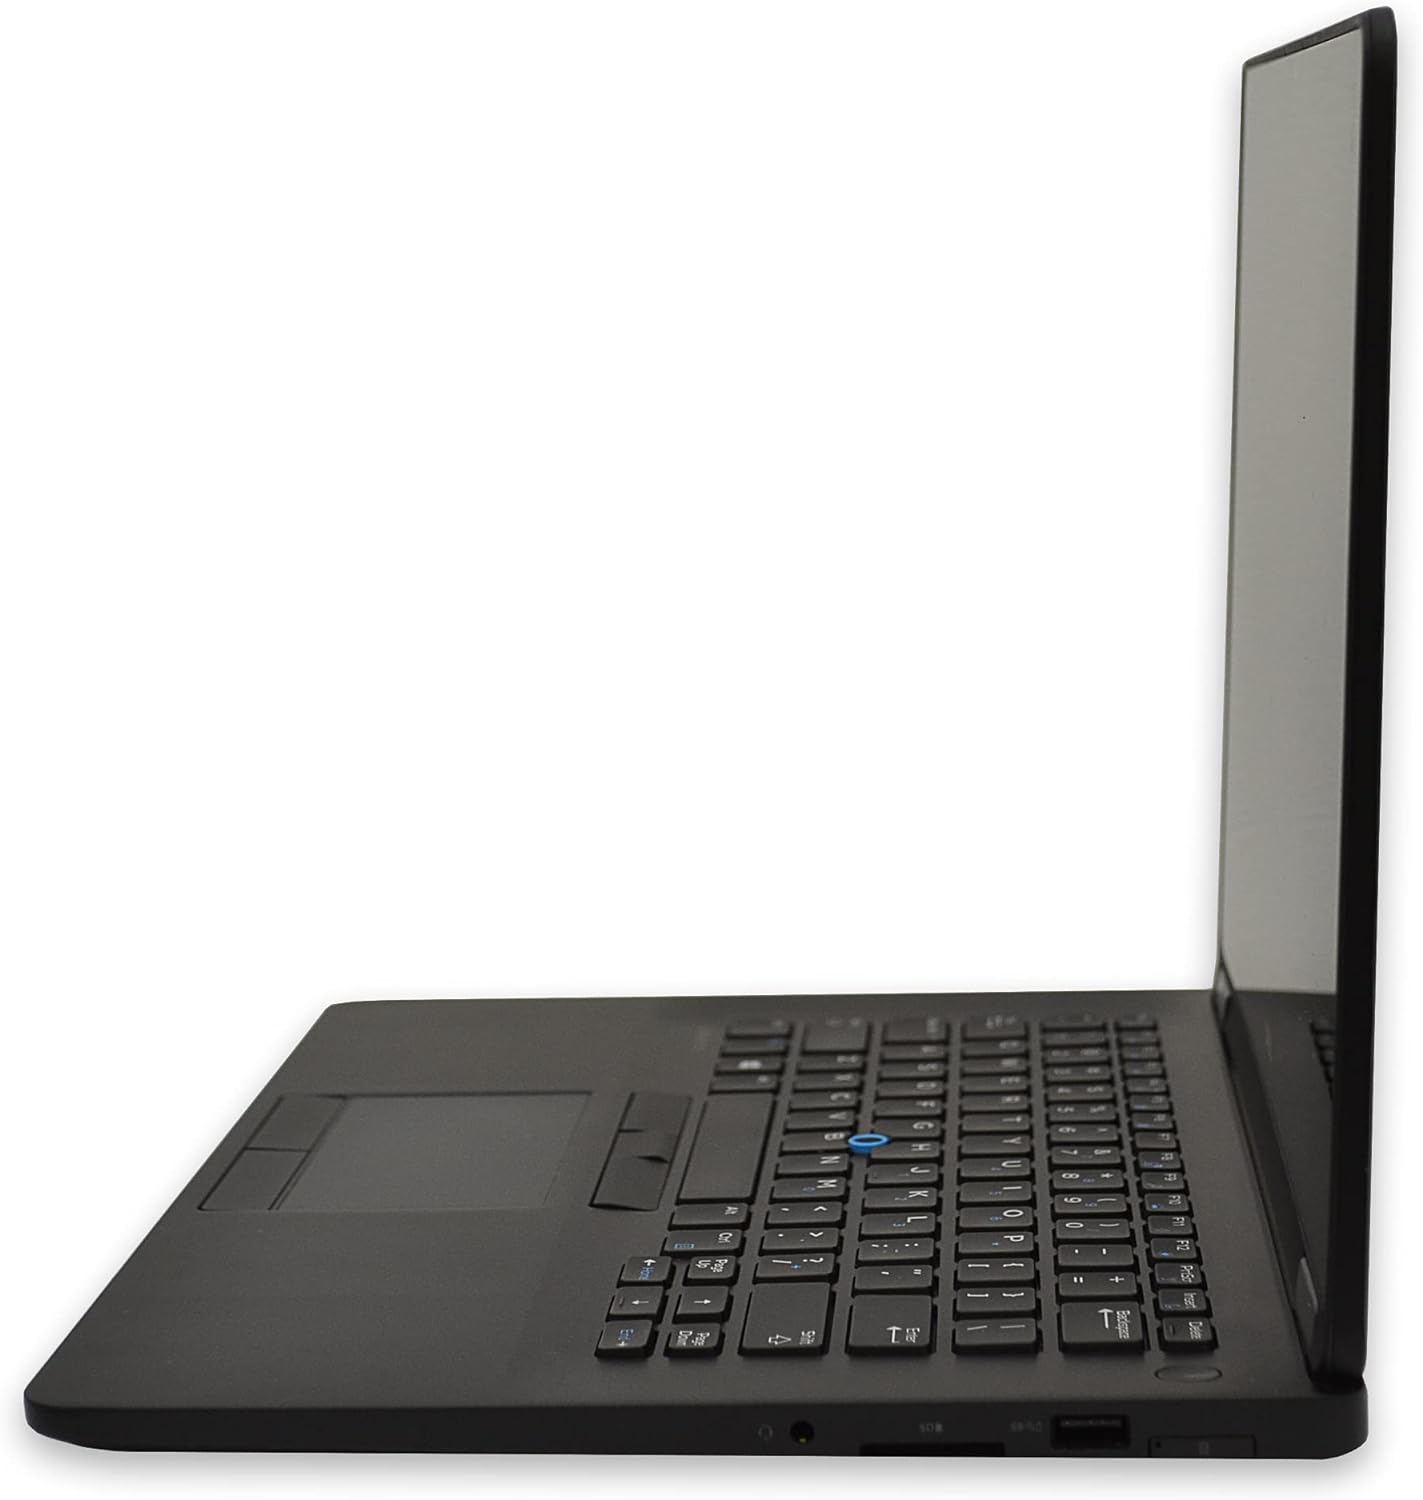 Refurbished Dell Laitude E7450 Laptop Intel Core i5, 8GB Ram, 128GB Solid State, Windows 10 Operating System